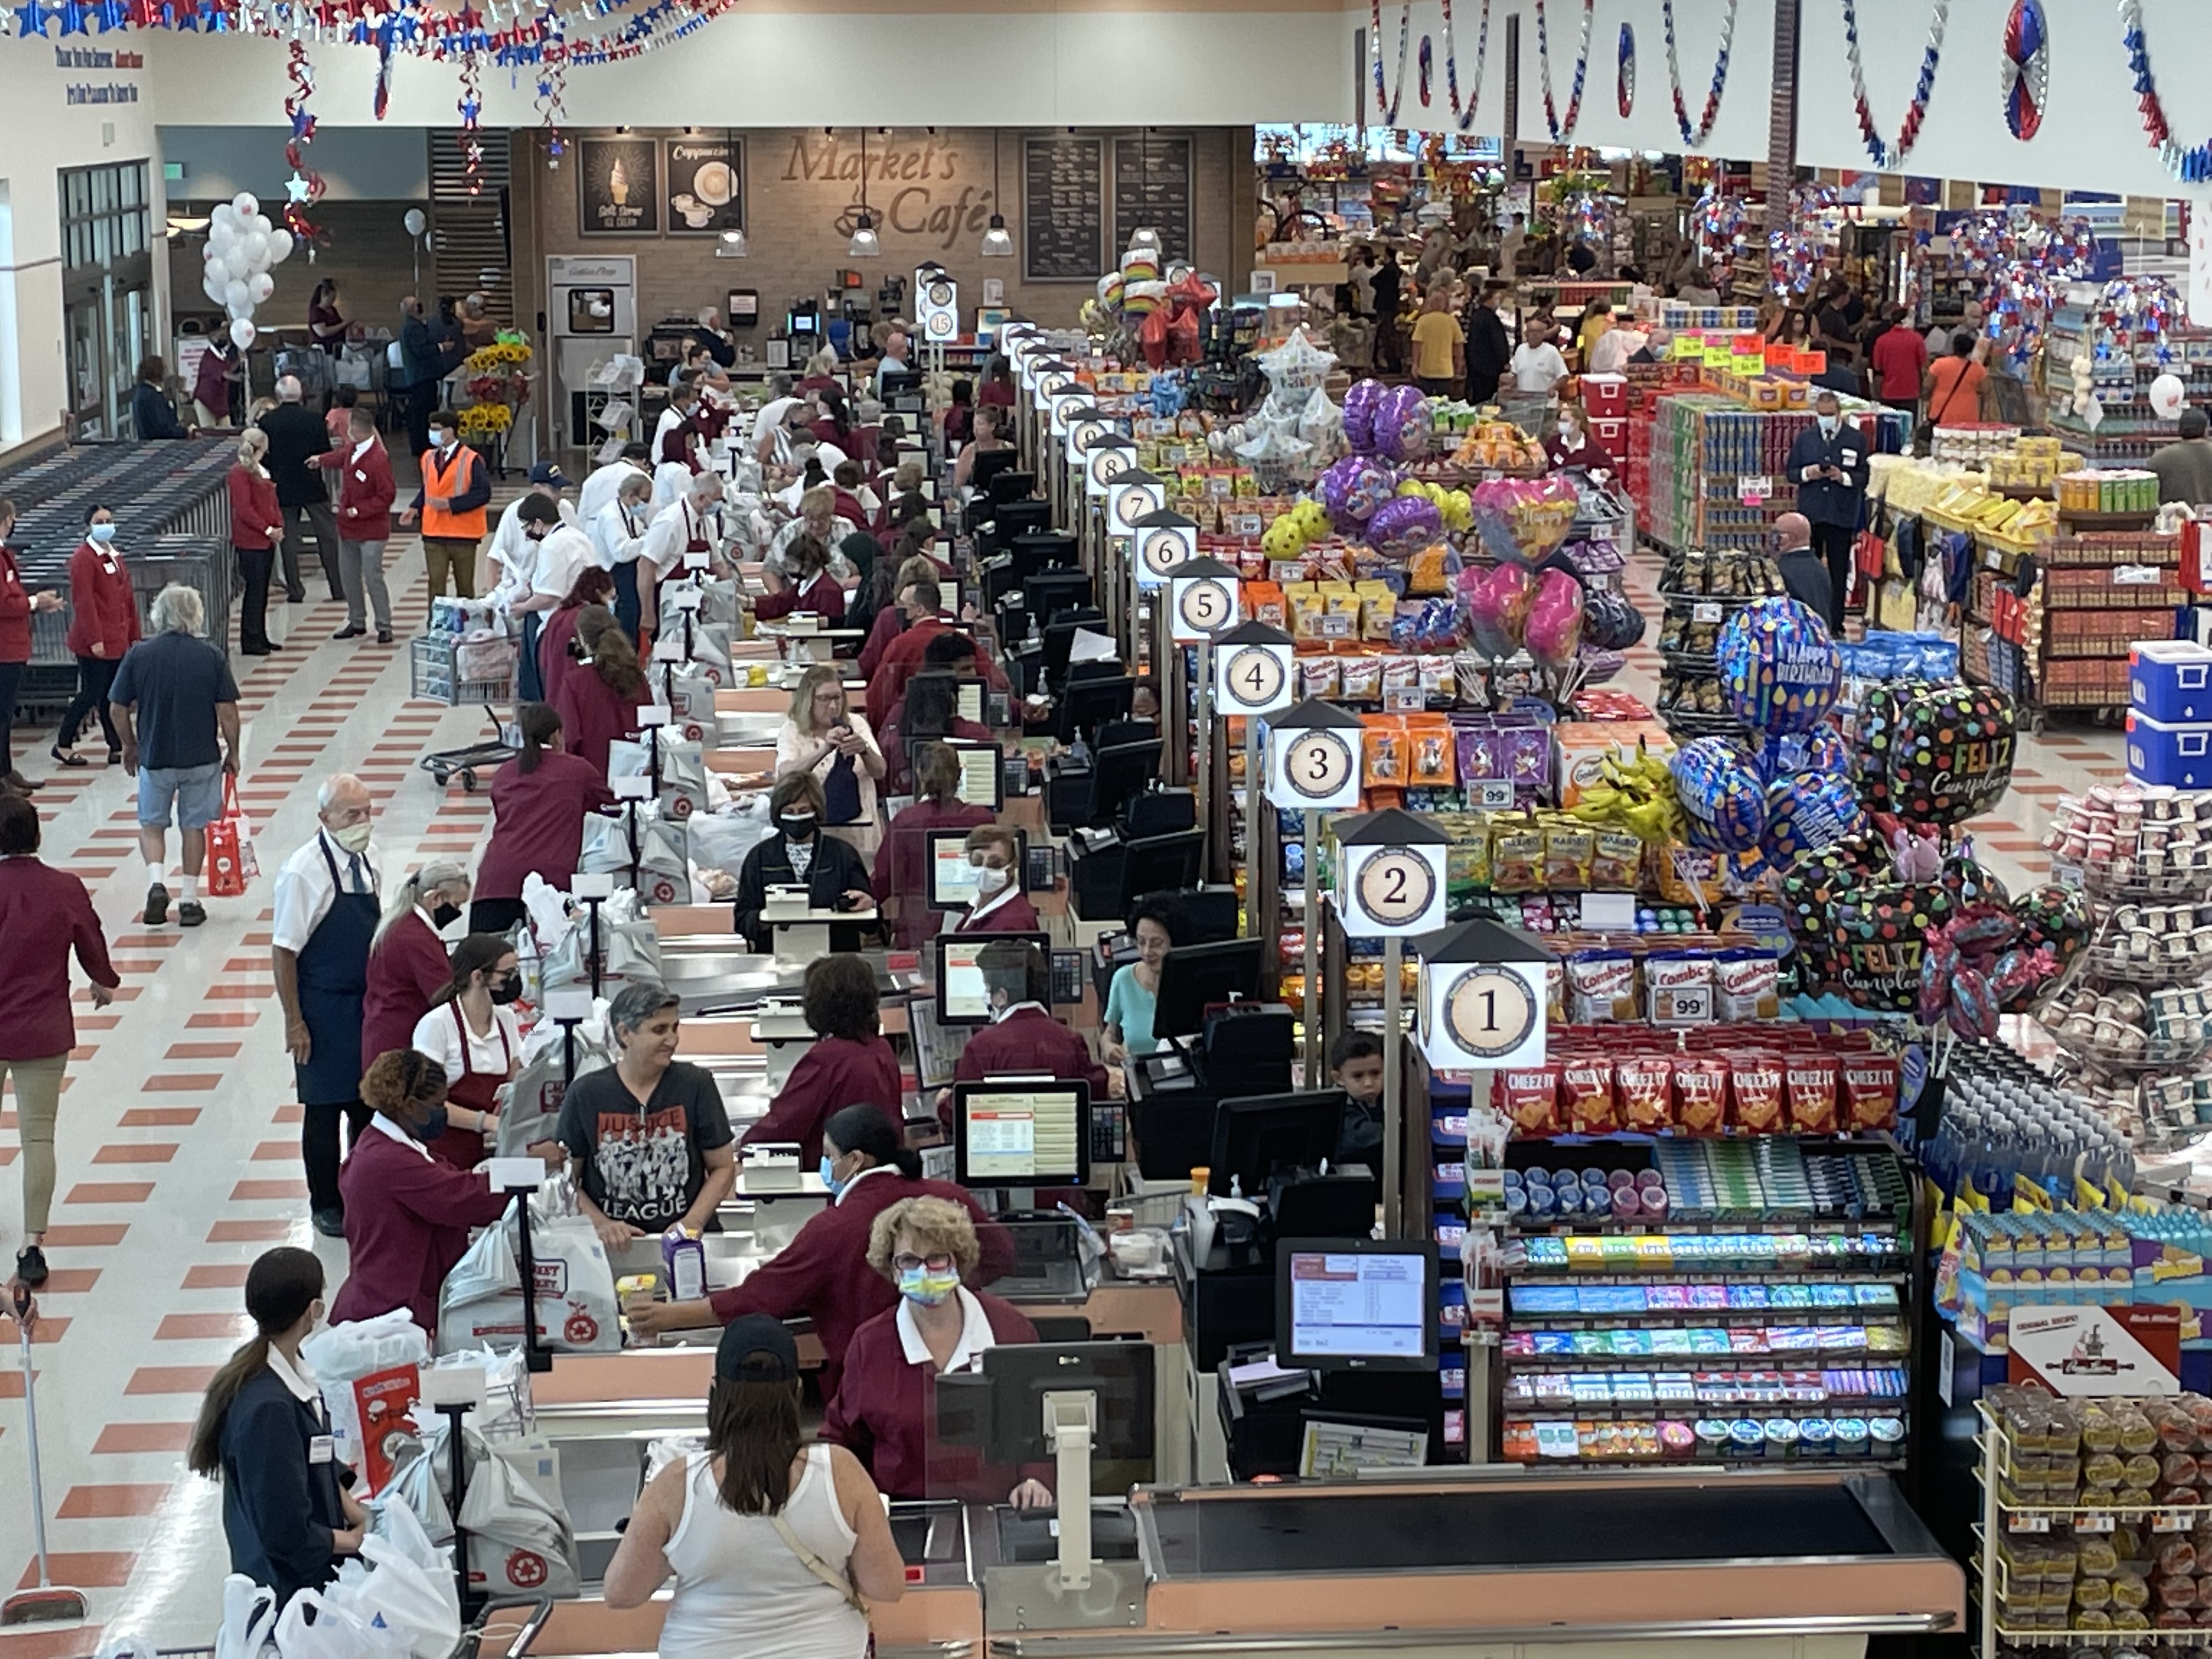 Market Basket brings 400 jobs to new $30M Johnston store, its 2nd in R.I.